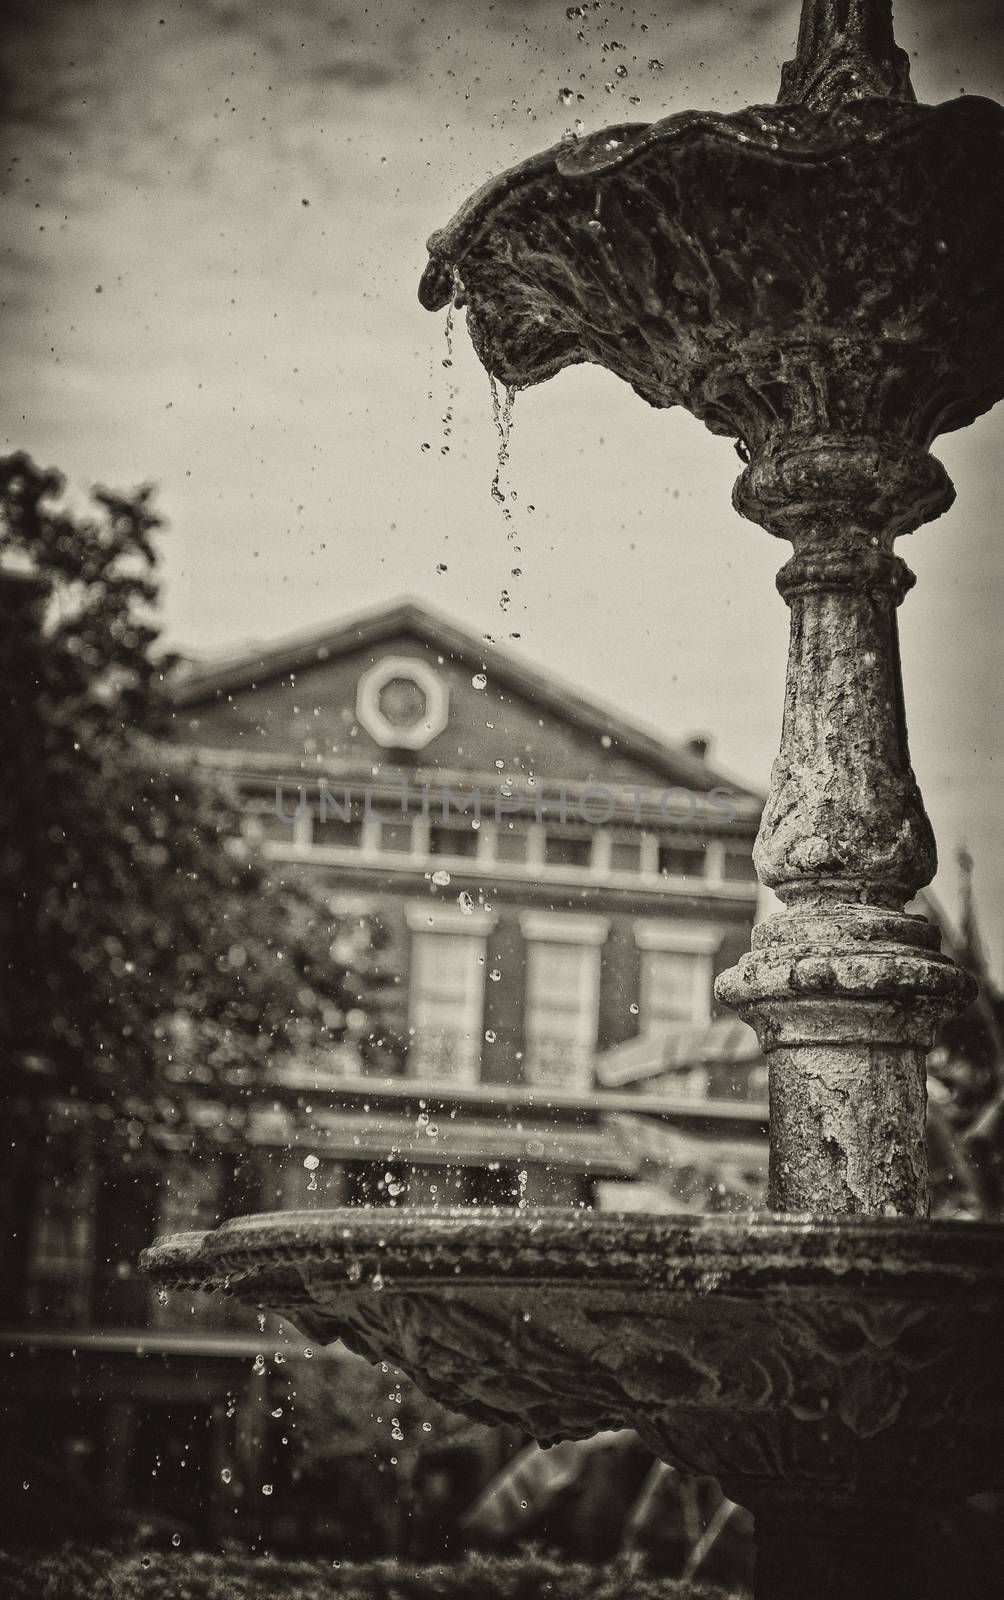 Fountain in Jackson Square Park, New Orleans by Charidy